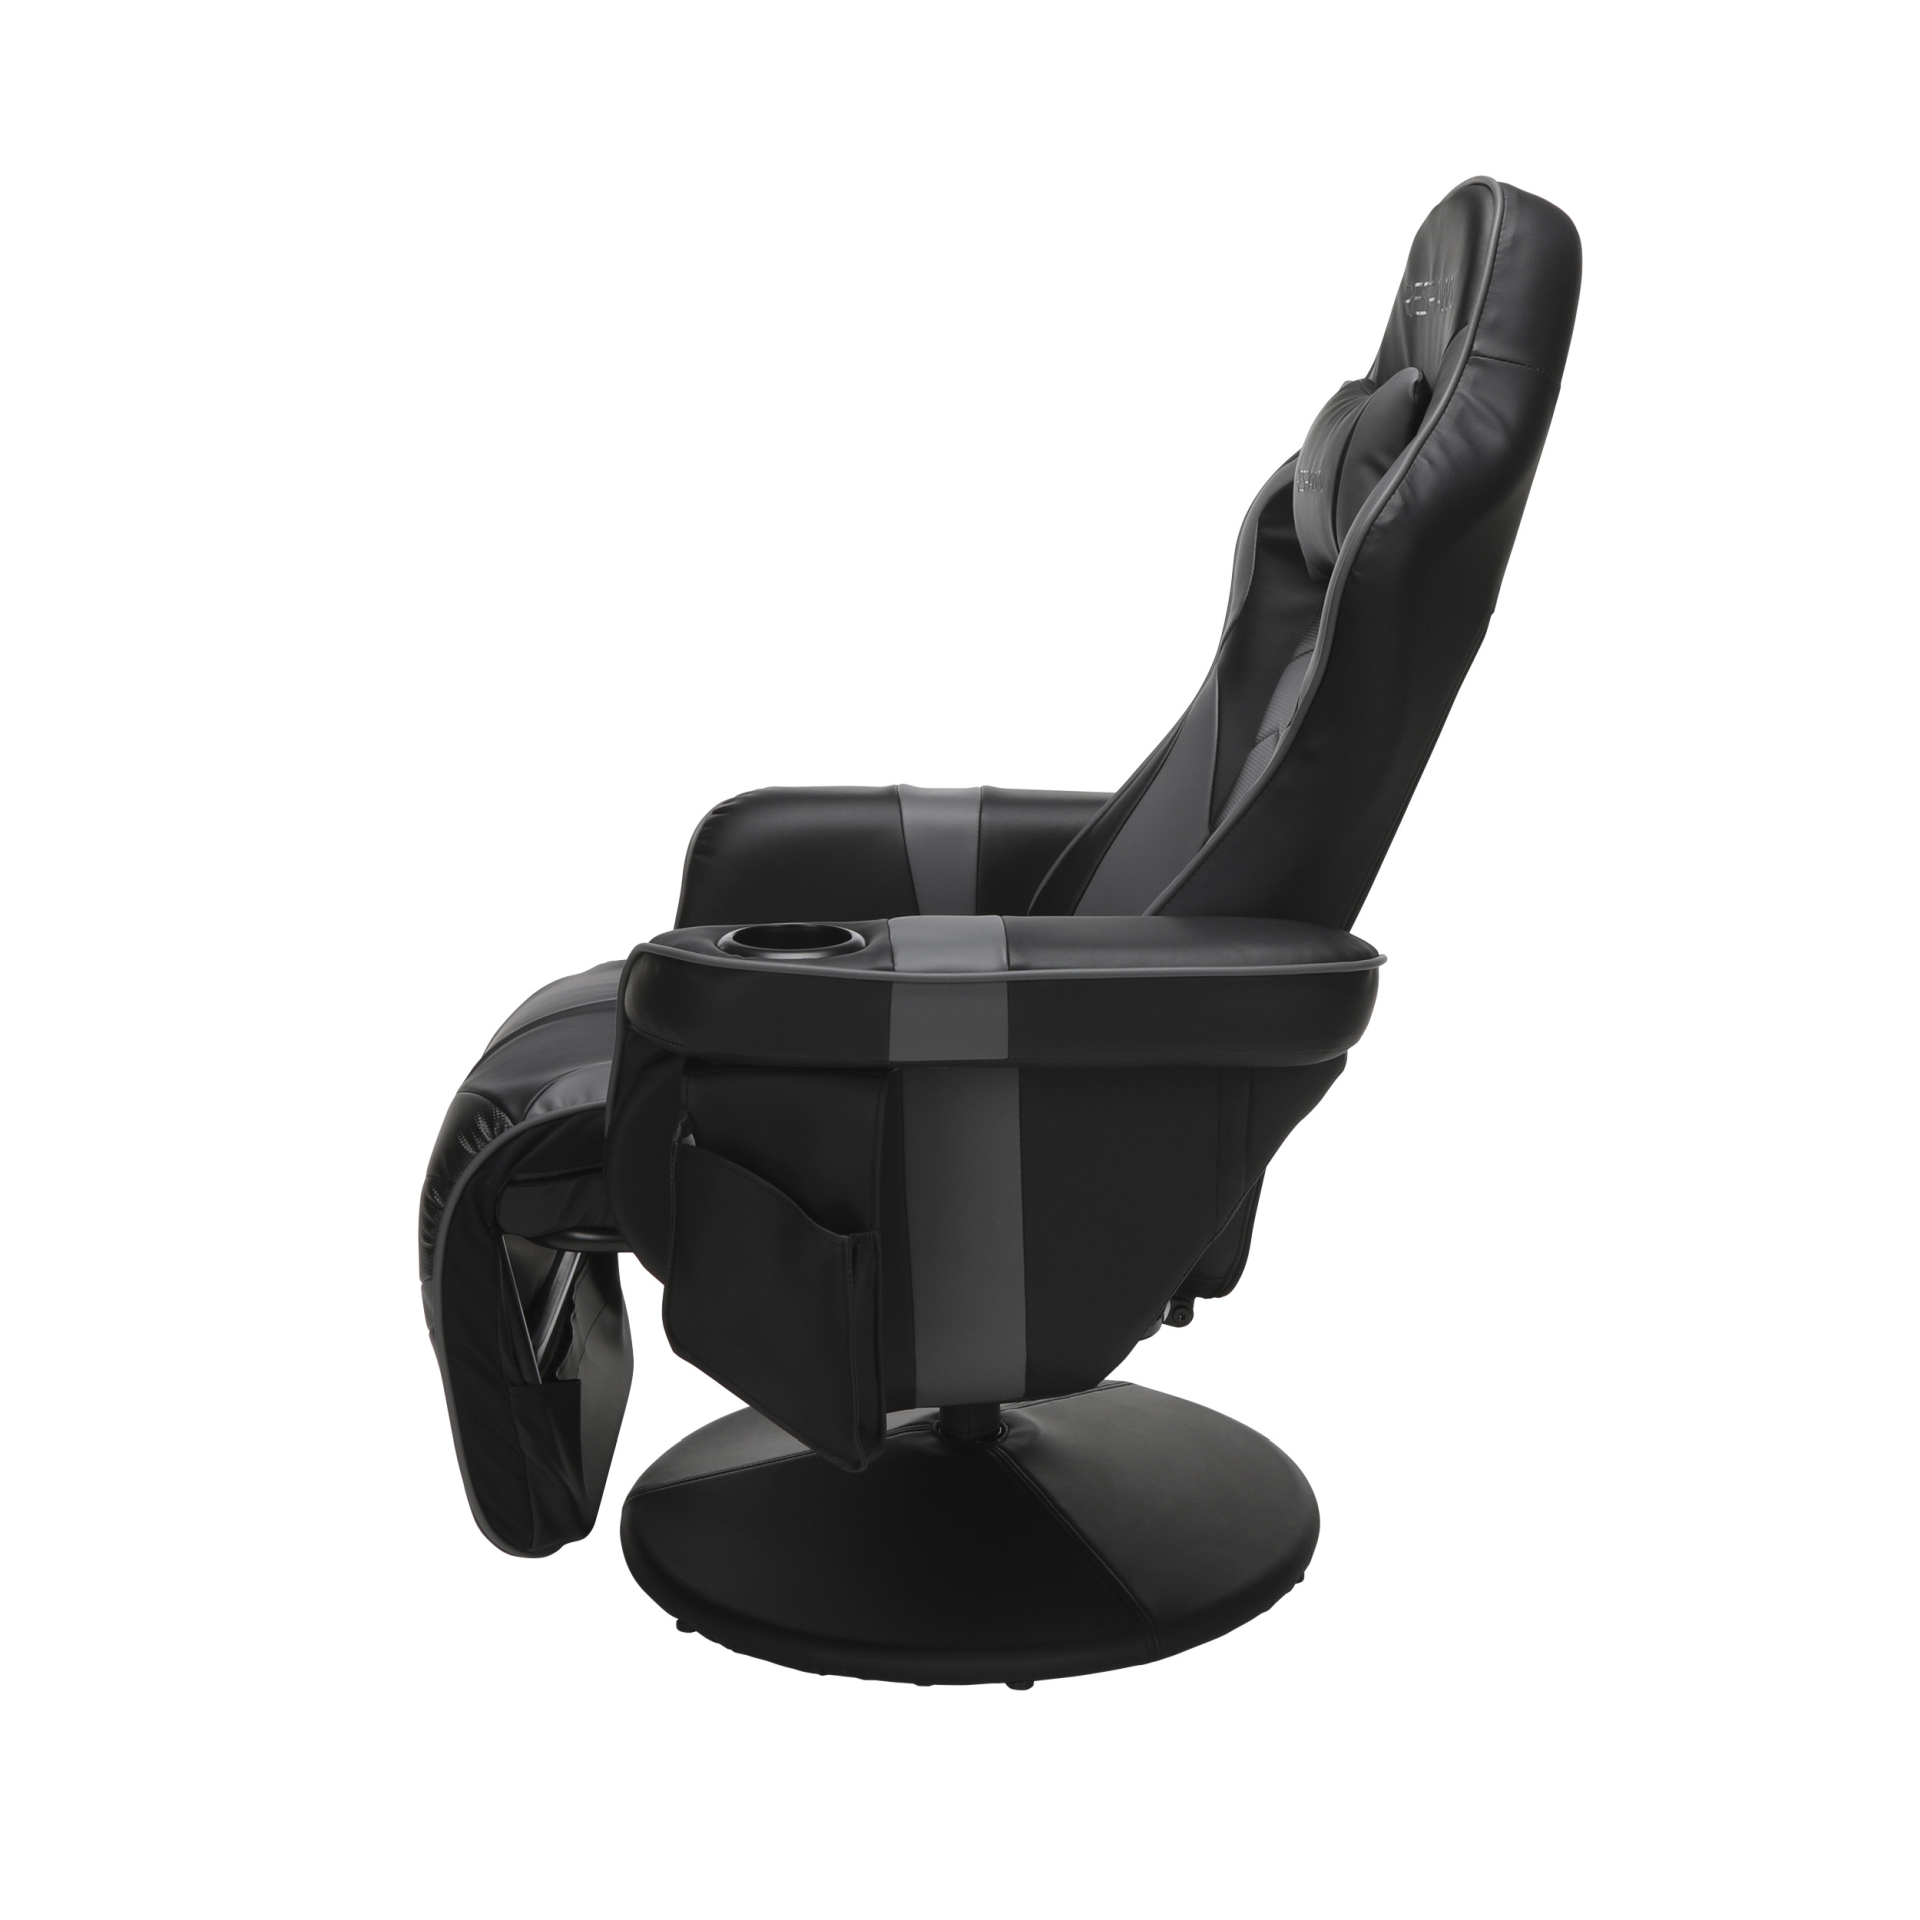 RESPAWN RSP-900 Gaming Recliner #19